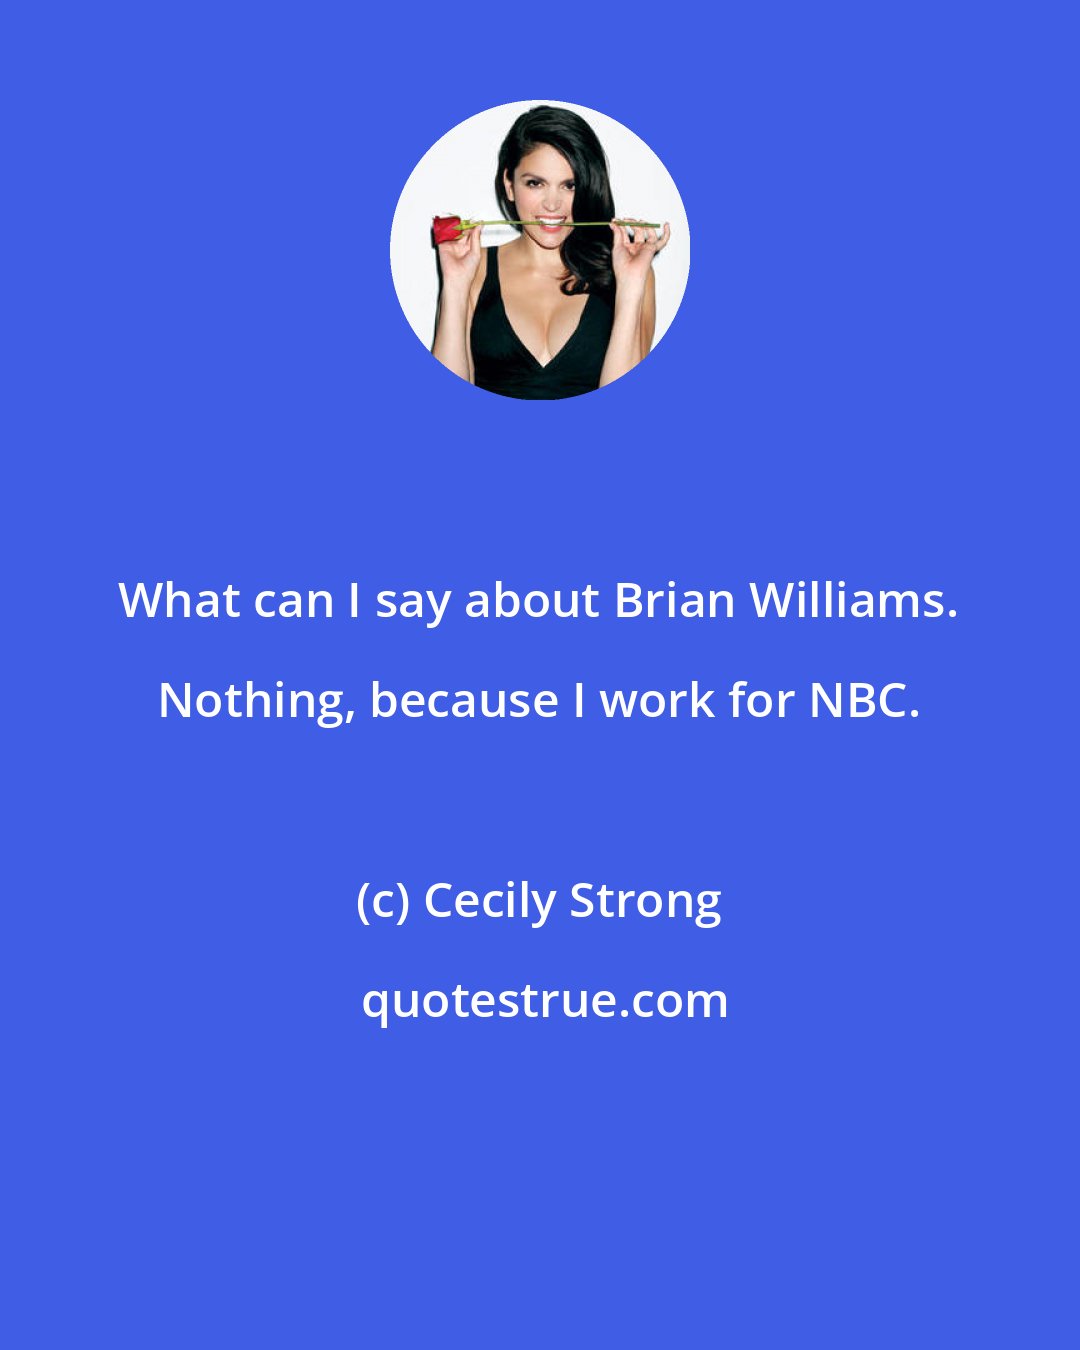 Cecily Strong: What can I say about Brian Williams. Nothing, because I work for NBC.